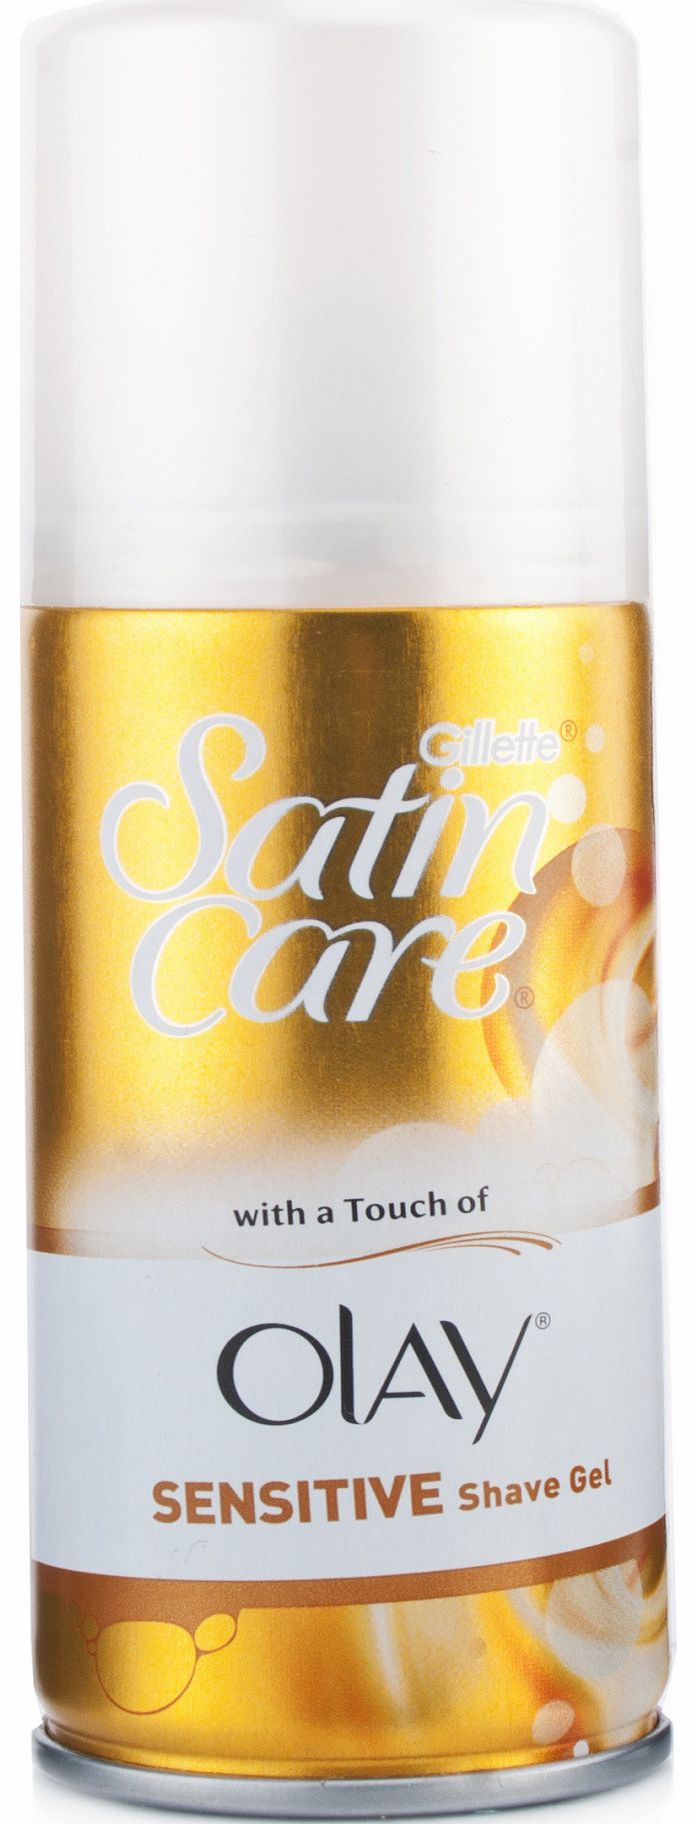 Venus Satin Care Touch of Olay Shave